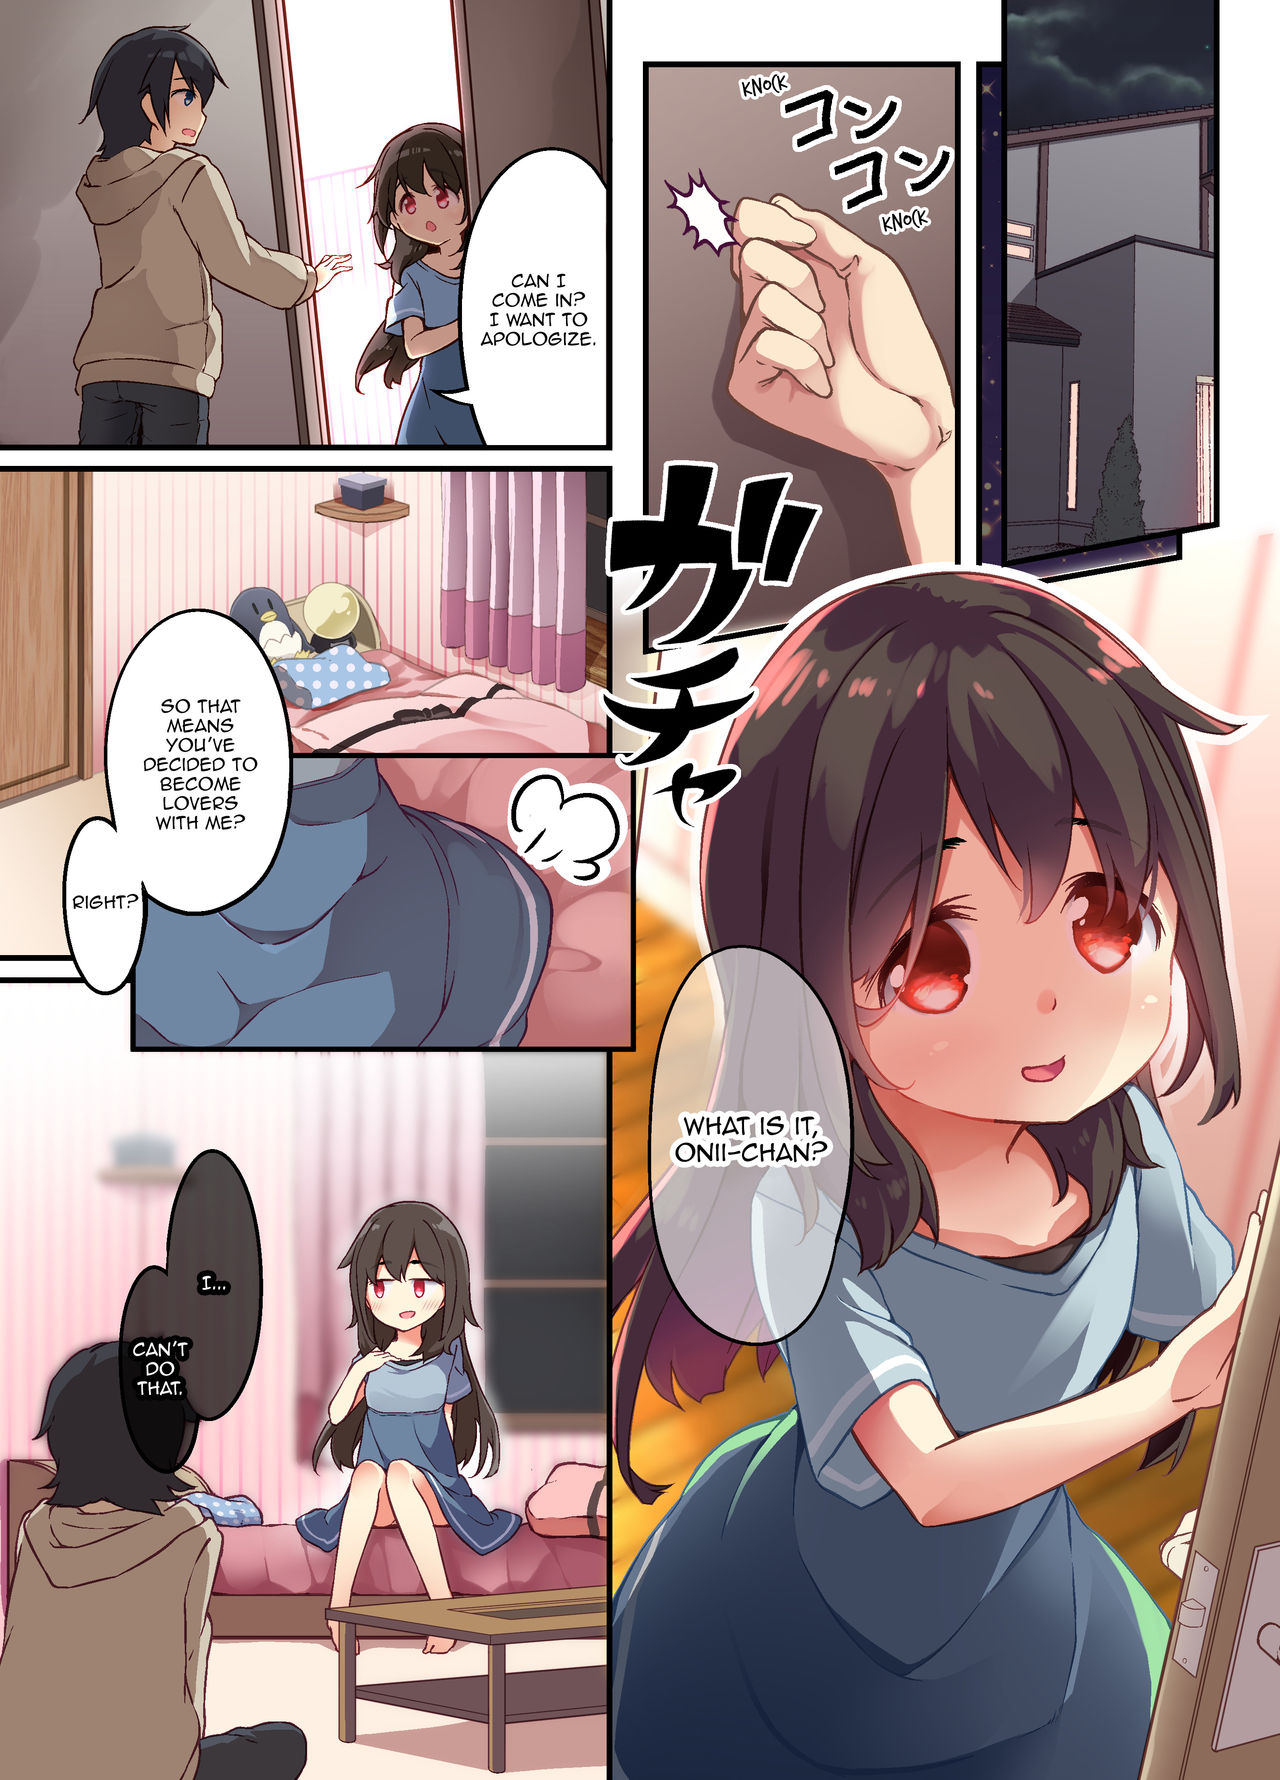 Big Brother Cartoon Porn - A Yandere Little Sister Wants to Be Impregnated by Her Big Brother, So She  Switches Bodies With Him and They Have Baby-Making Sex - Page 6 - HentaiFox